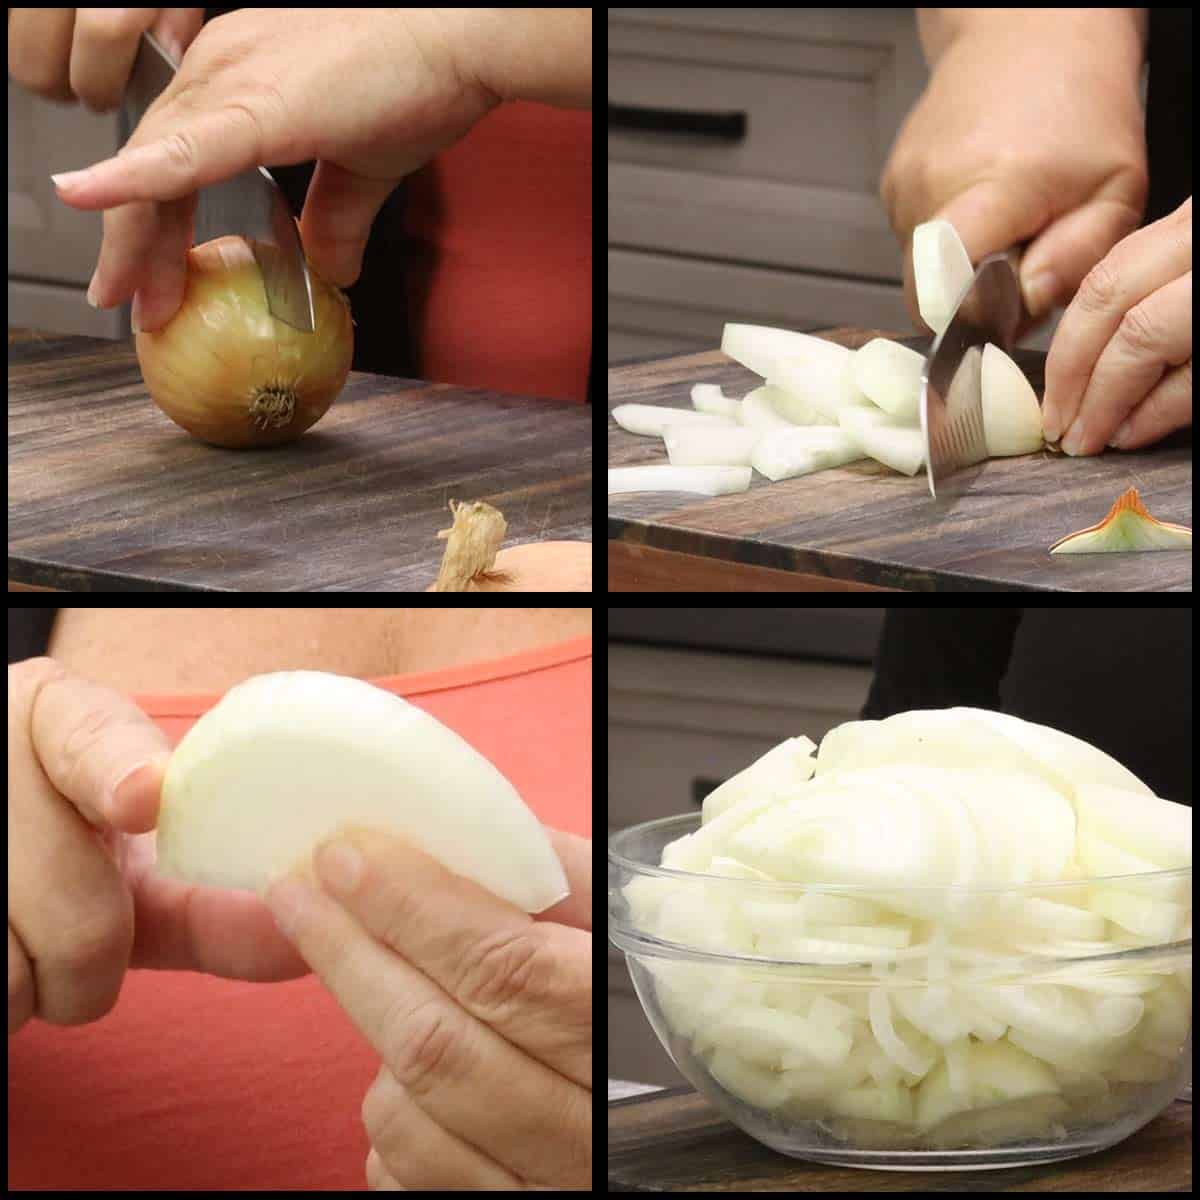 cutting the onions for french onion pasta.